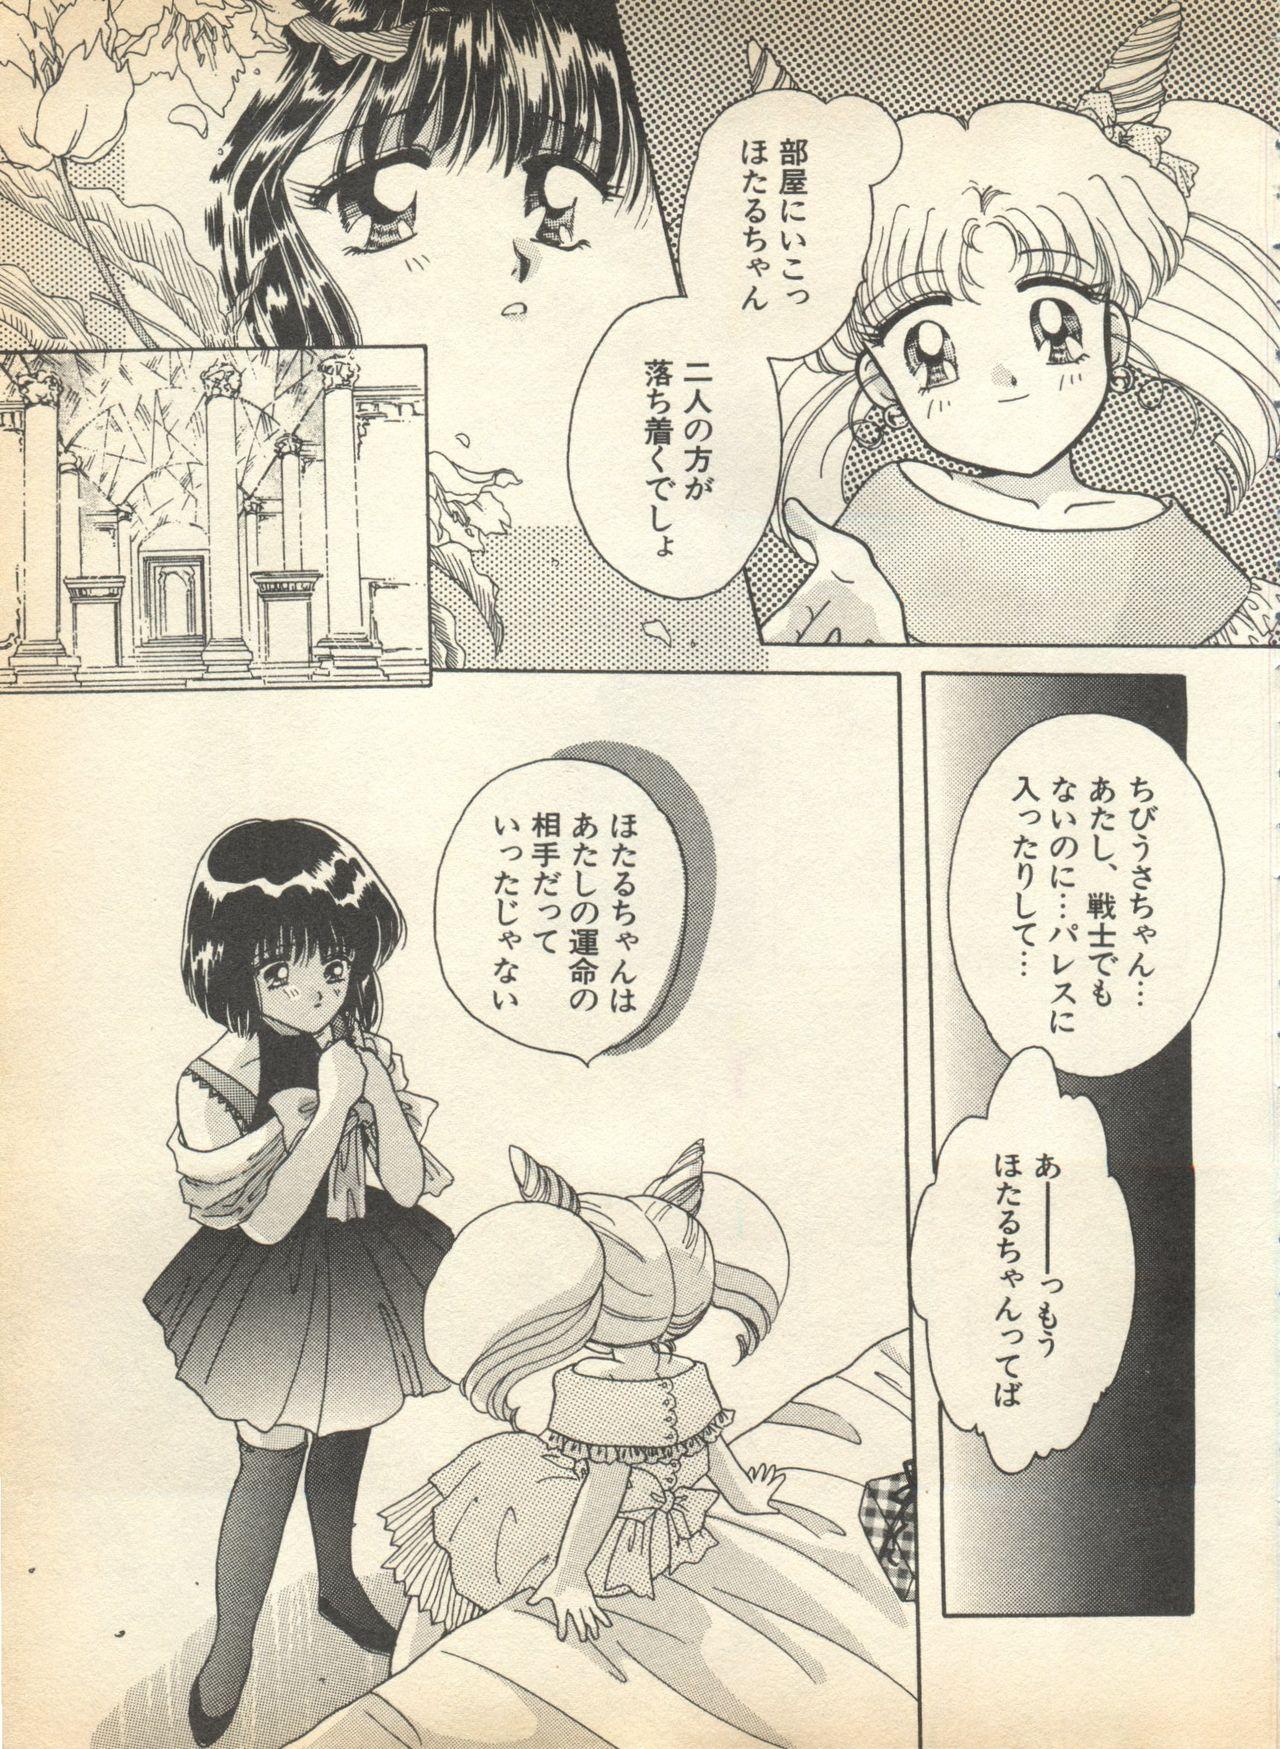 Brazilian Lunatic Party 8 - Sailor moon Married - Page 9